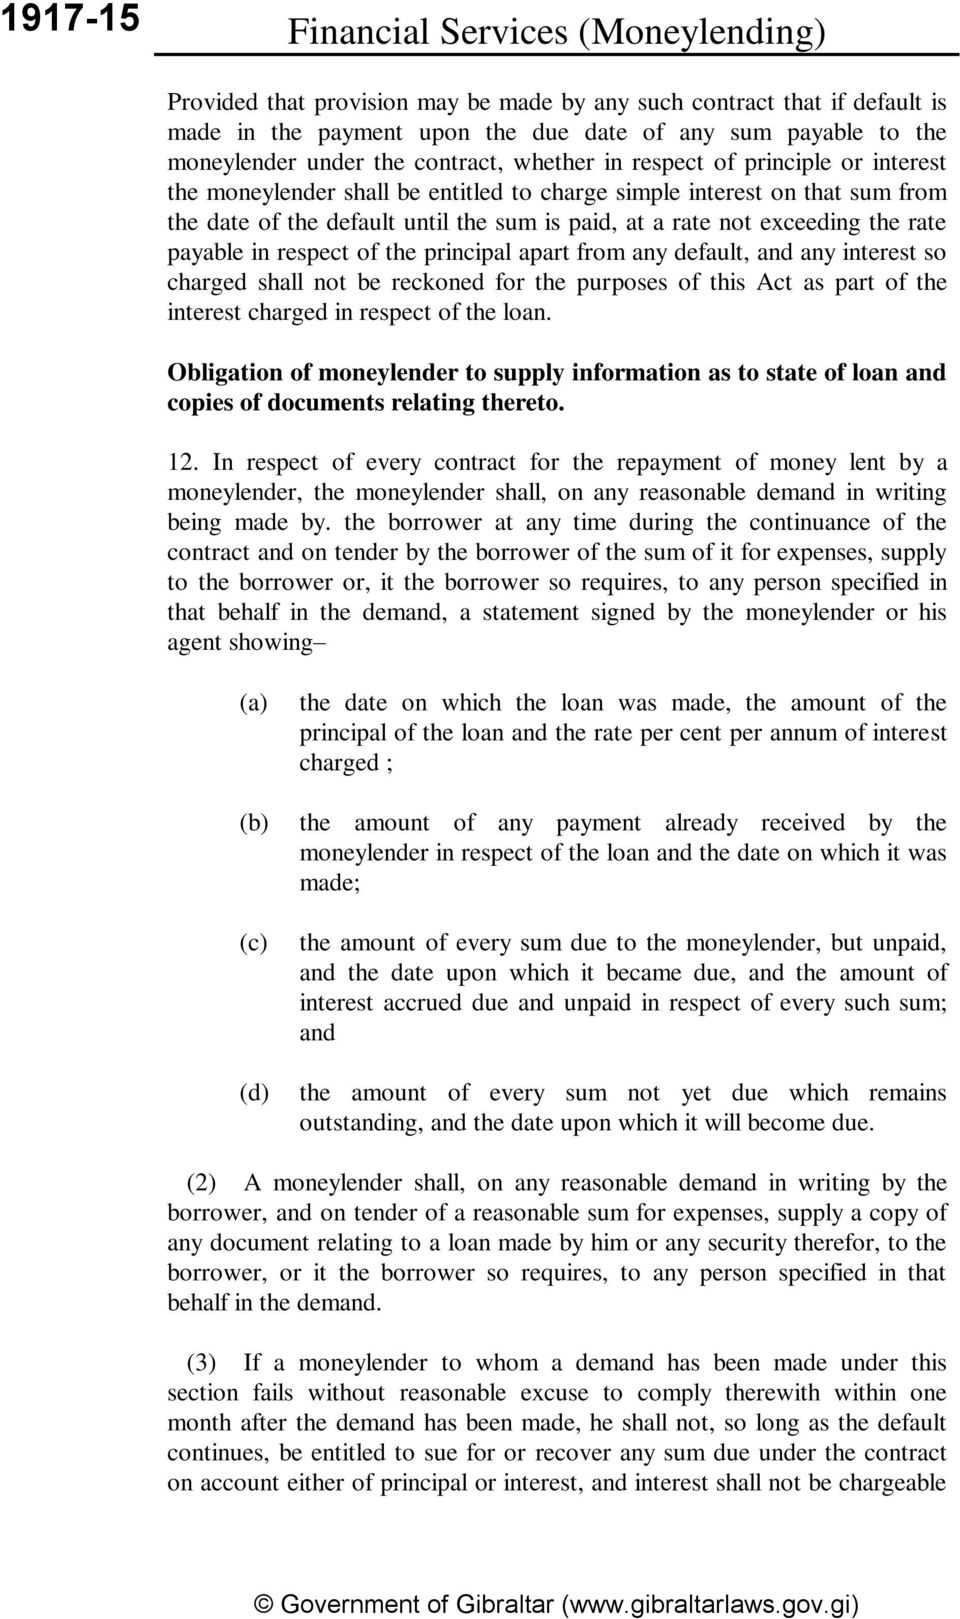 exceeding the rate payable in respect of the principal apart from any default, and any interest so charged shall not be reckoned for the purposes of this Act as part of the interest charged in